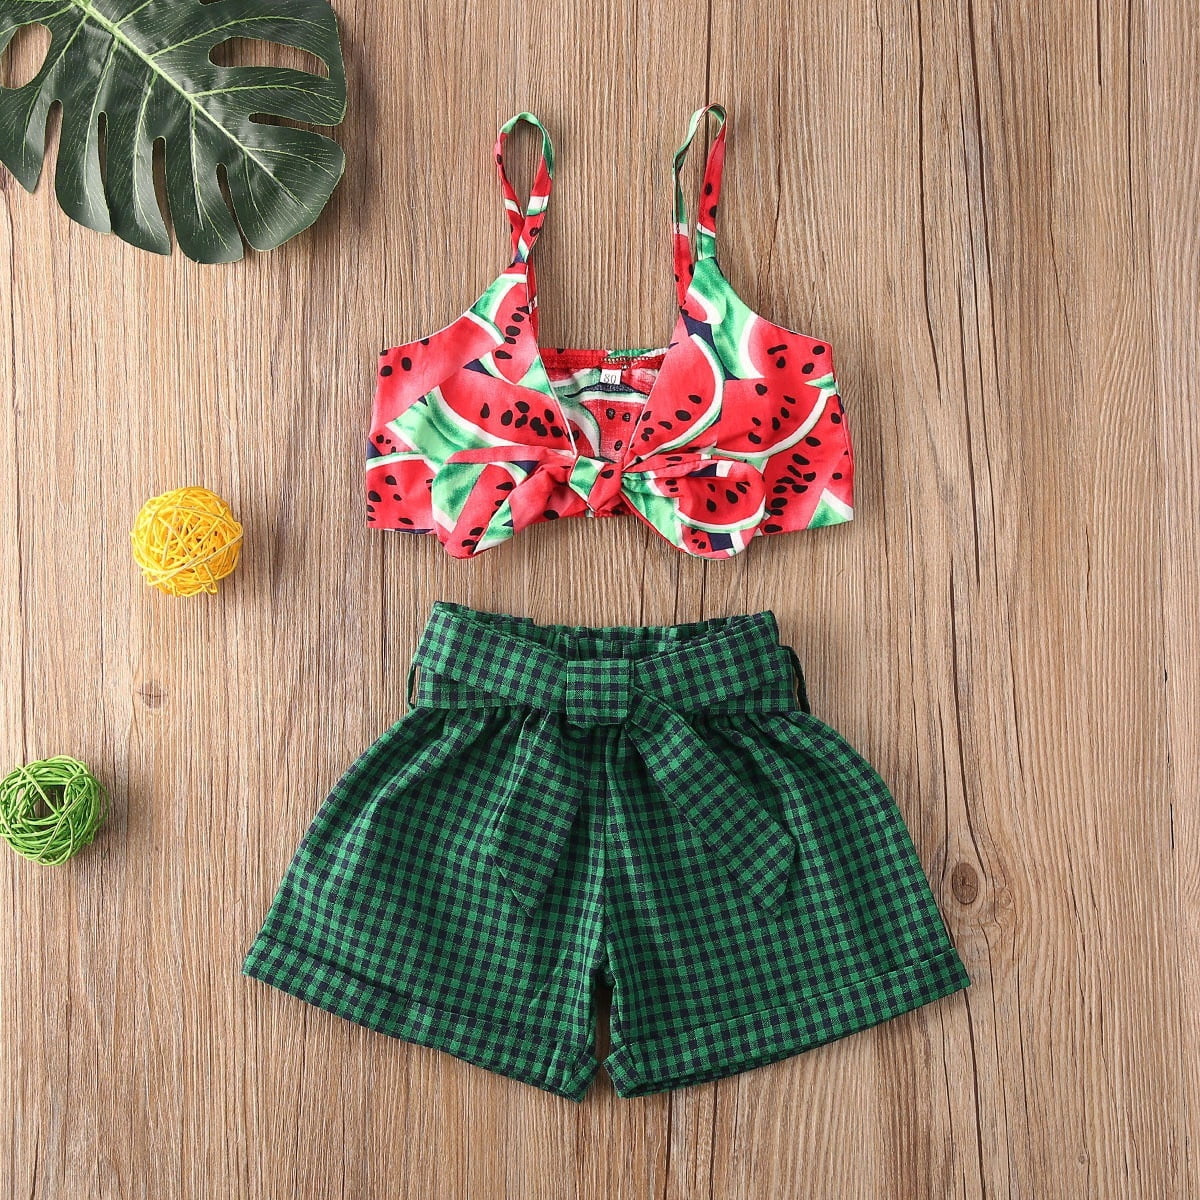 Toddler Kid Baby Girl Vest Top T-shirt+Watermelon Short Pants Outfit Set Clothes 